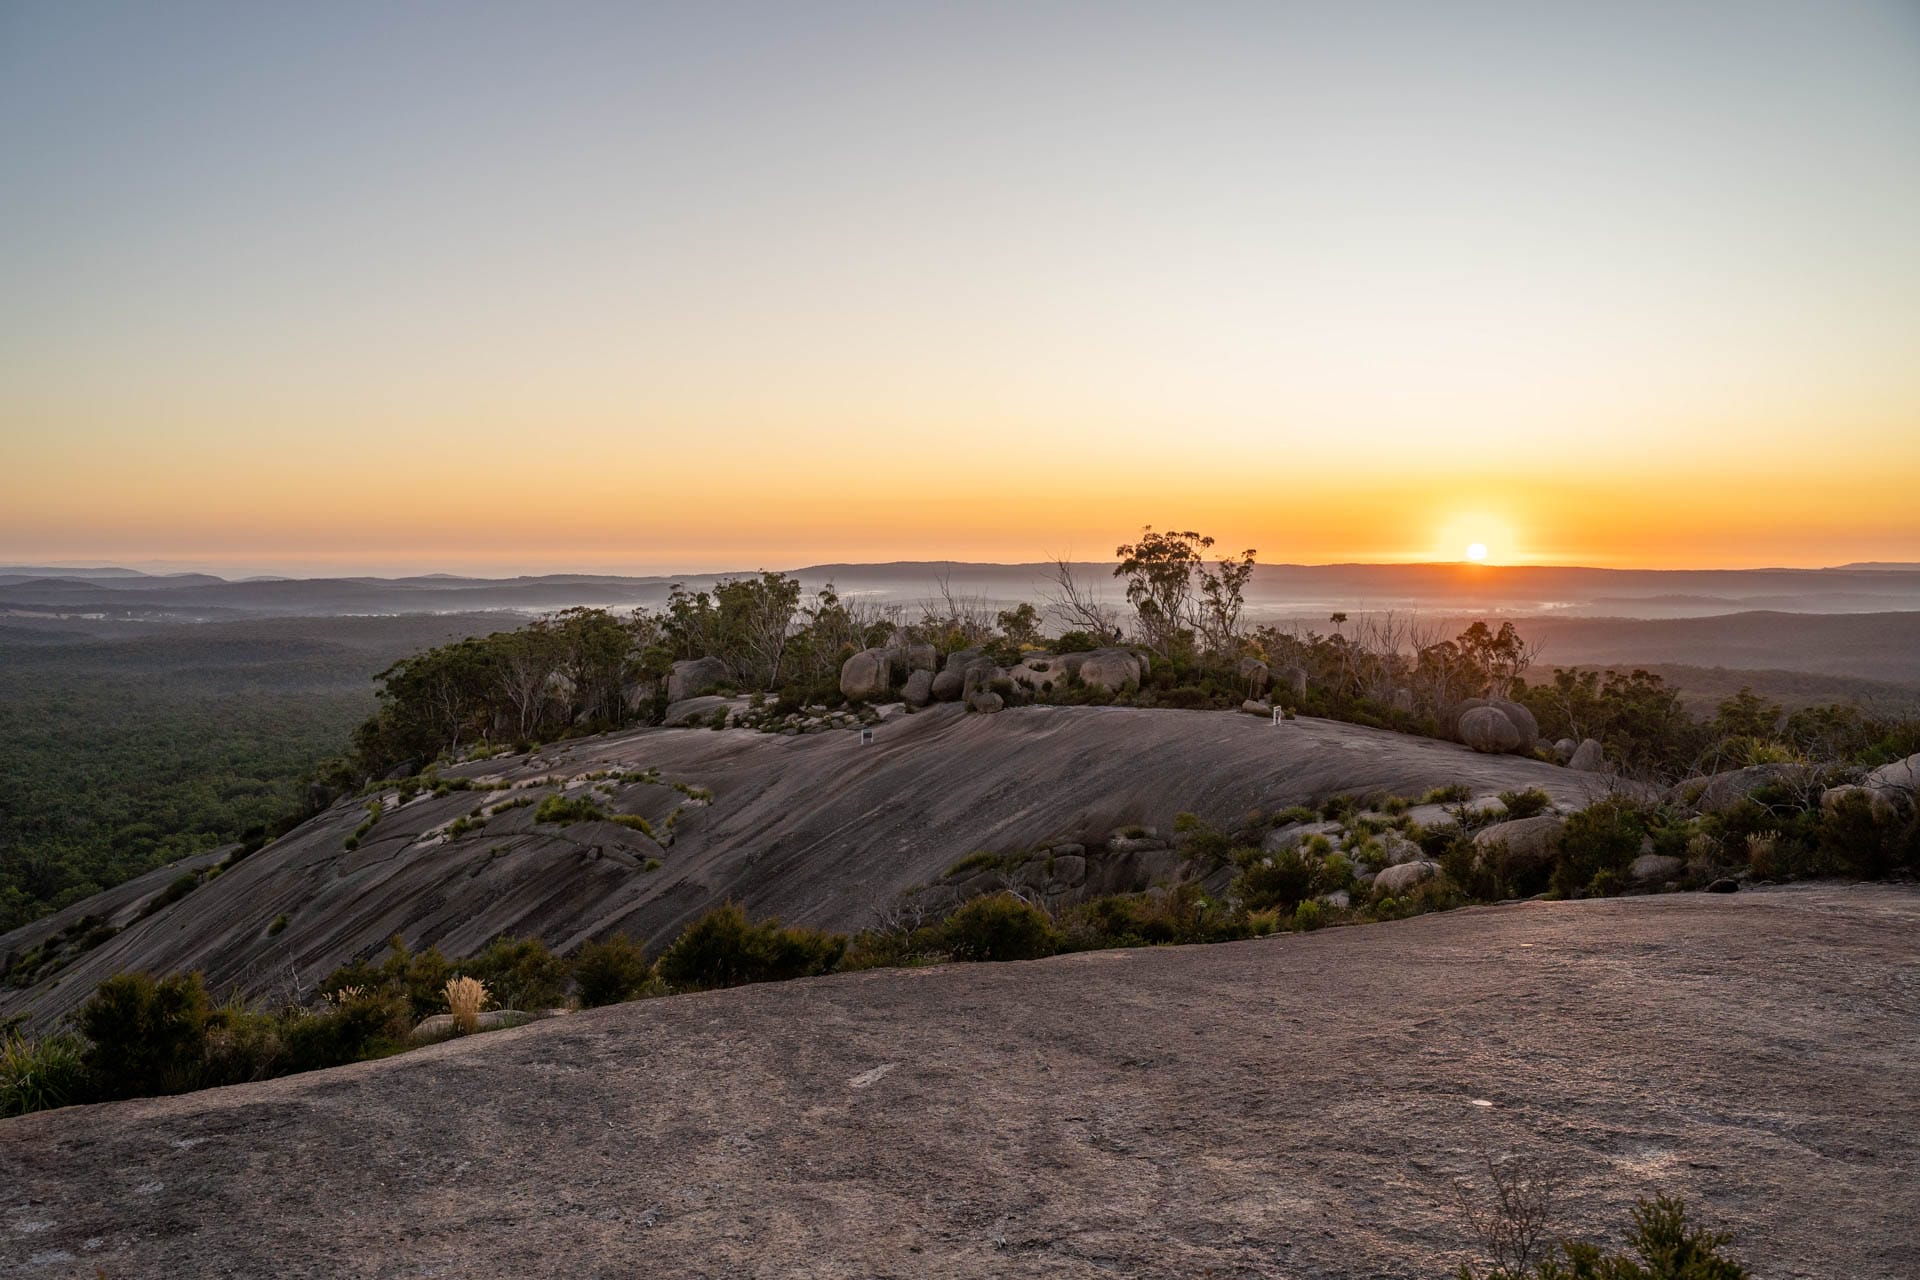 A Weekend in Tenterfield: Where to Stay, Adventure, and Eat, constance allan, bald rock sunrise, horizon